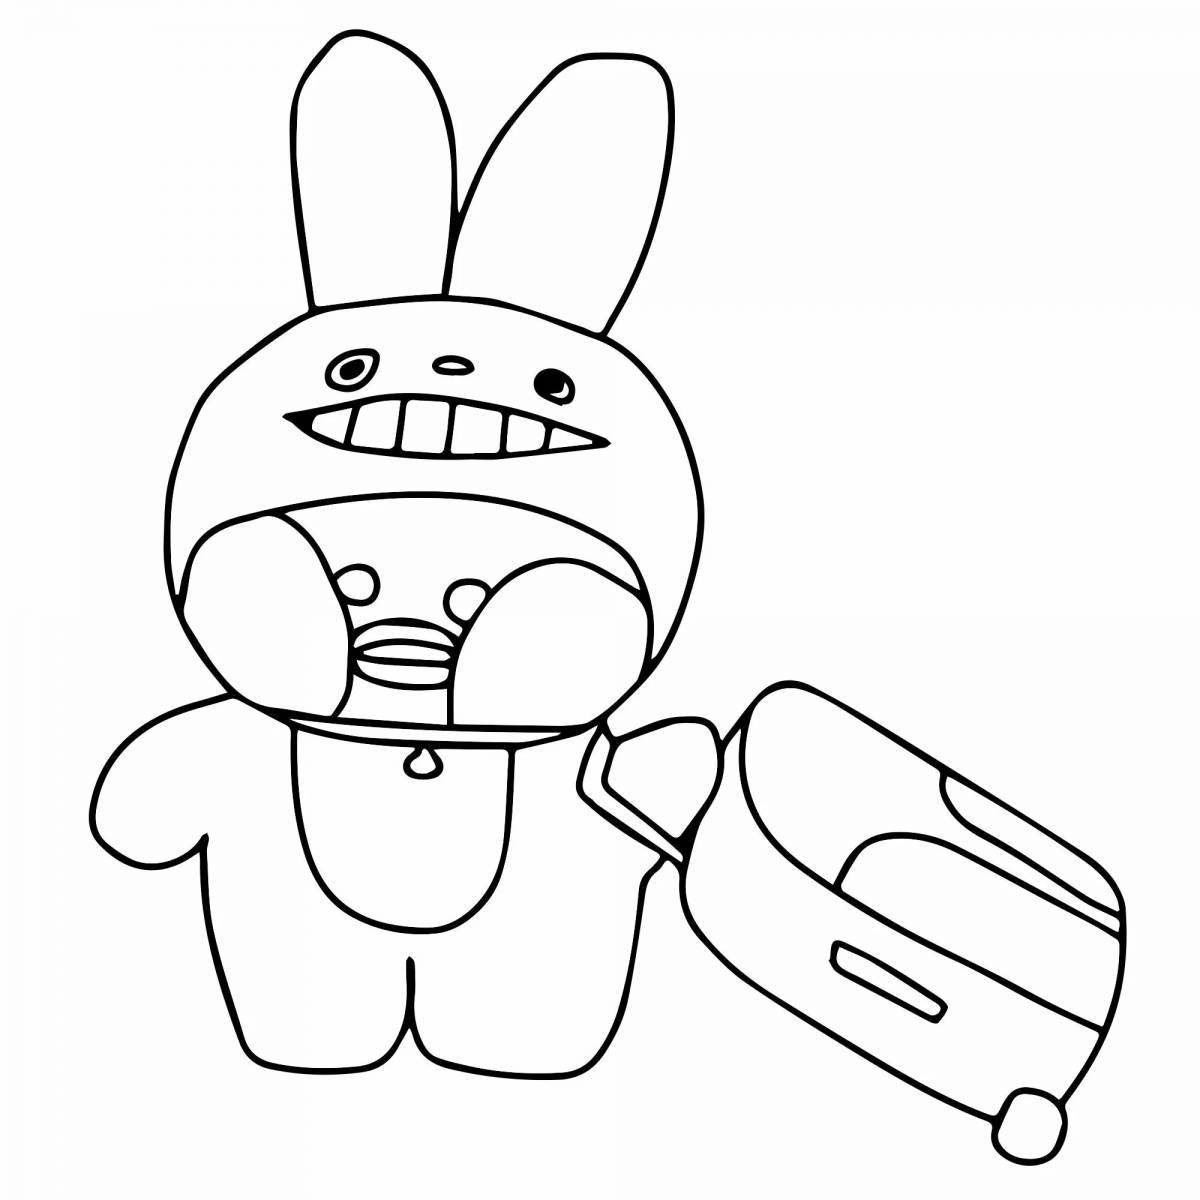 Lolofan duck coloring page